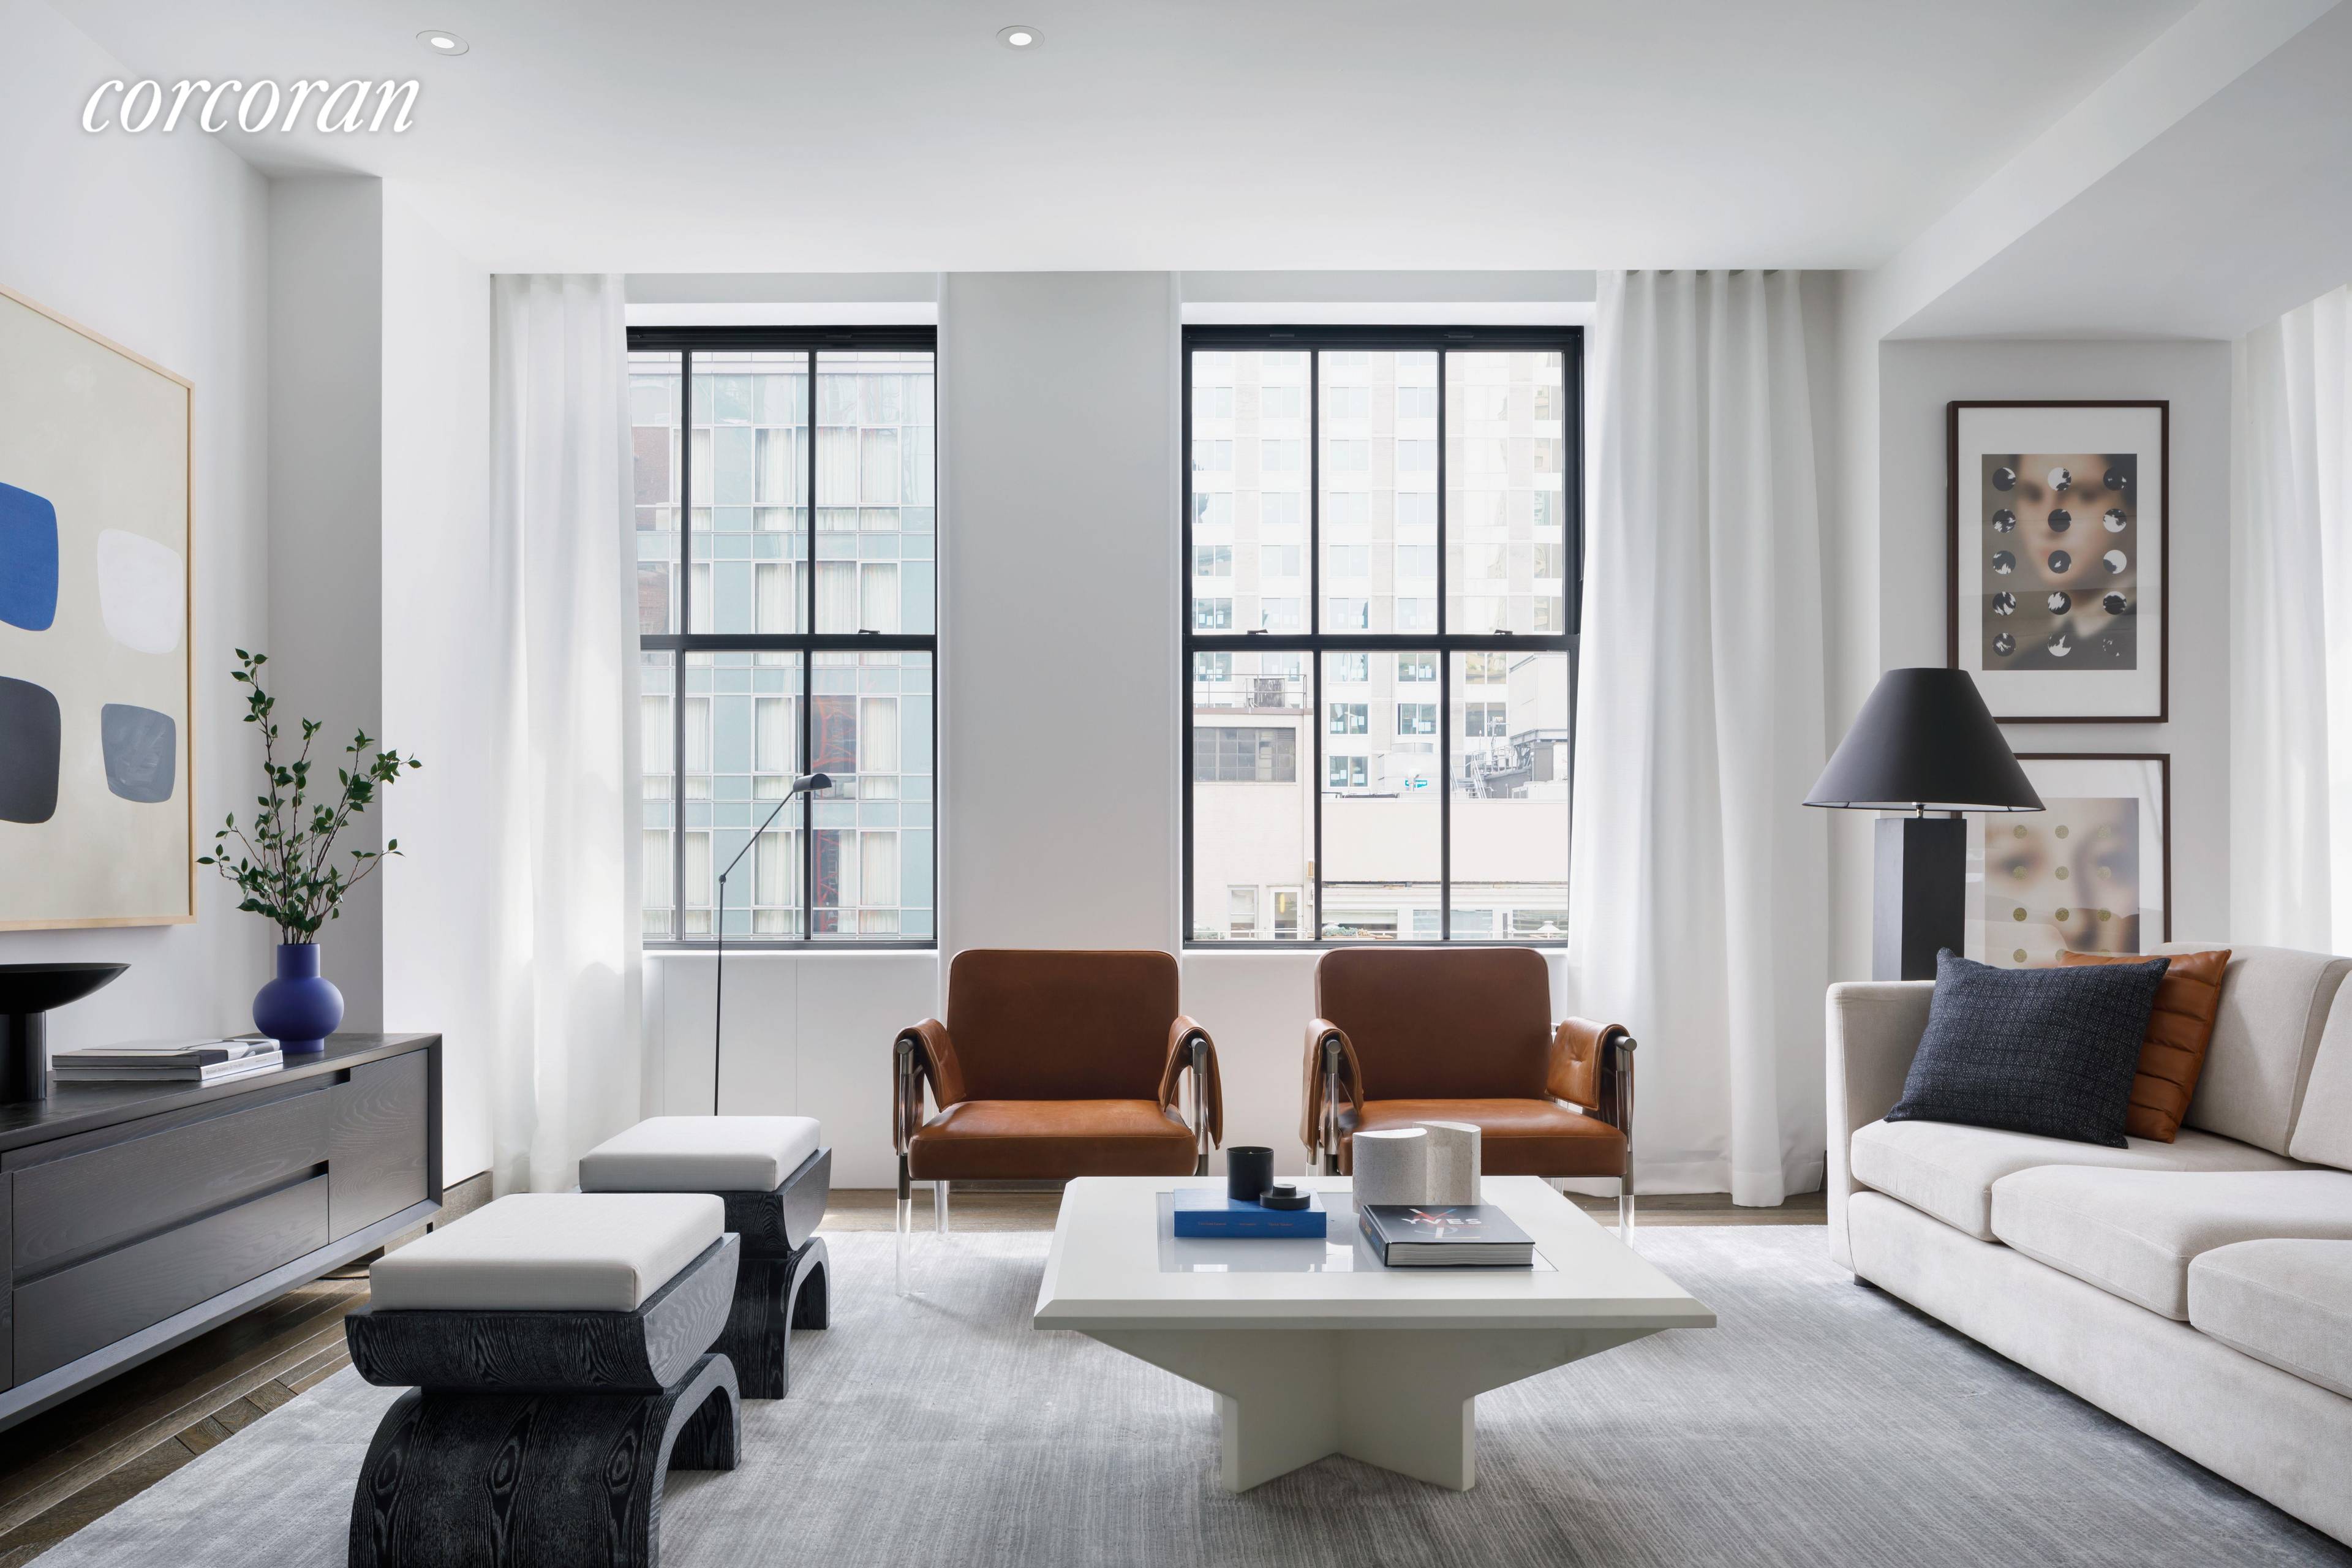 CLOSINGS HAVE COMMENCED. Available for immediate occupancy, Landmark Residence 11A at 111 West 57th Street provides an unparalleled opportunity for one who enjoys modern conveniences within grand spaces reminiscent of ...